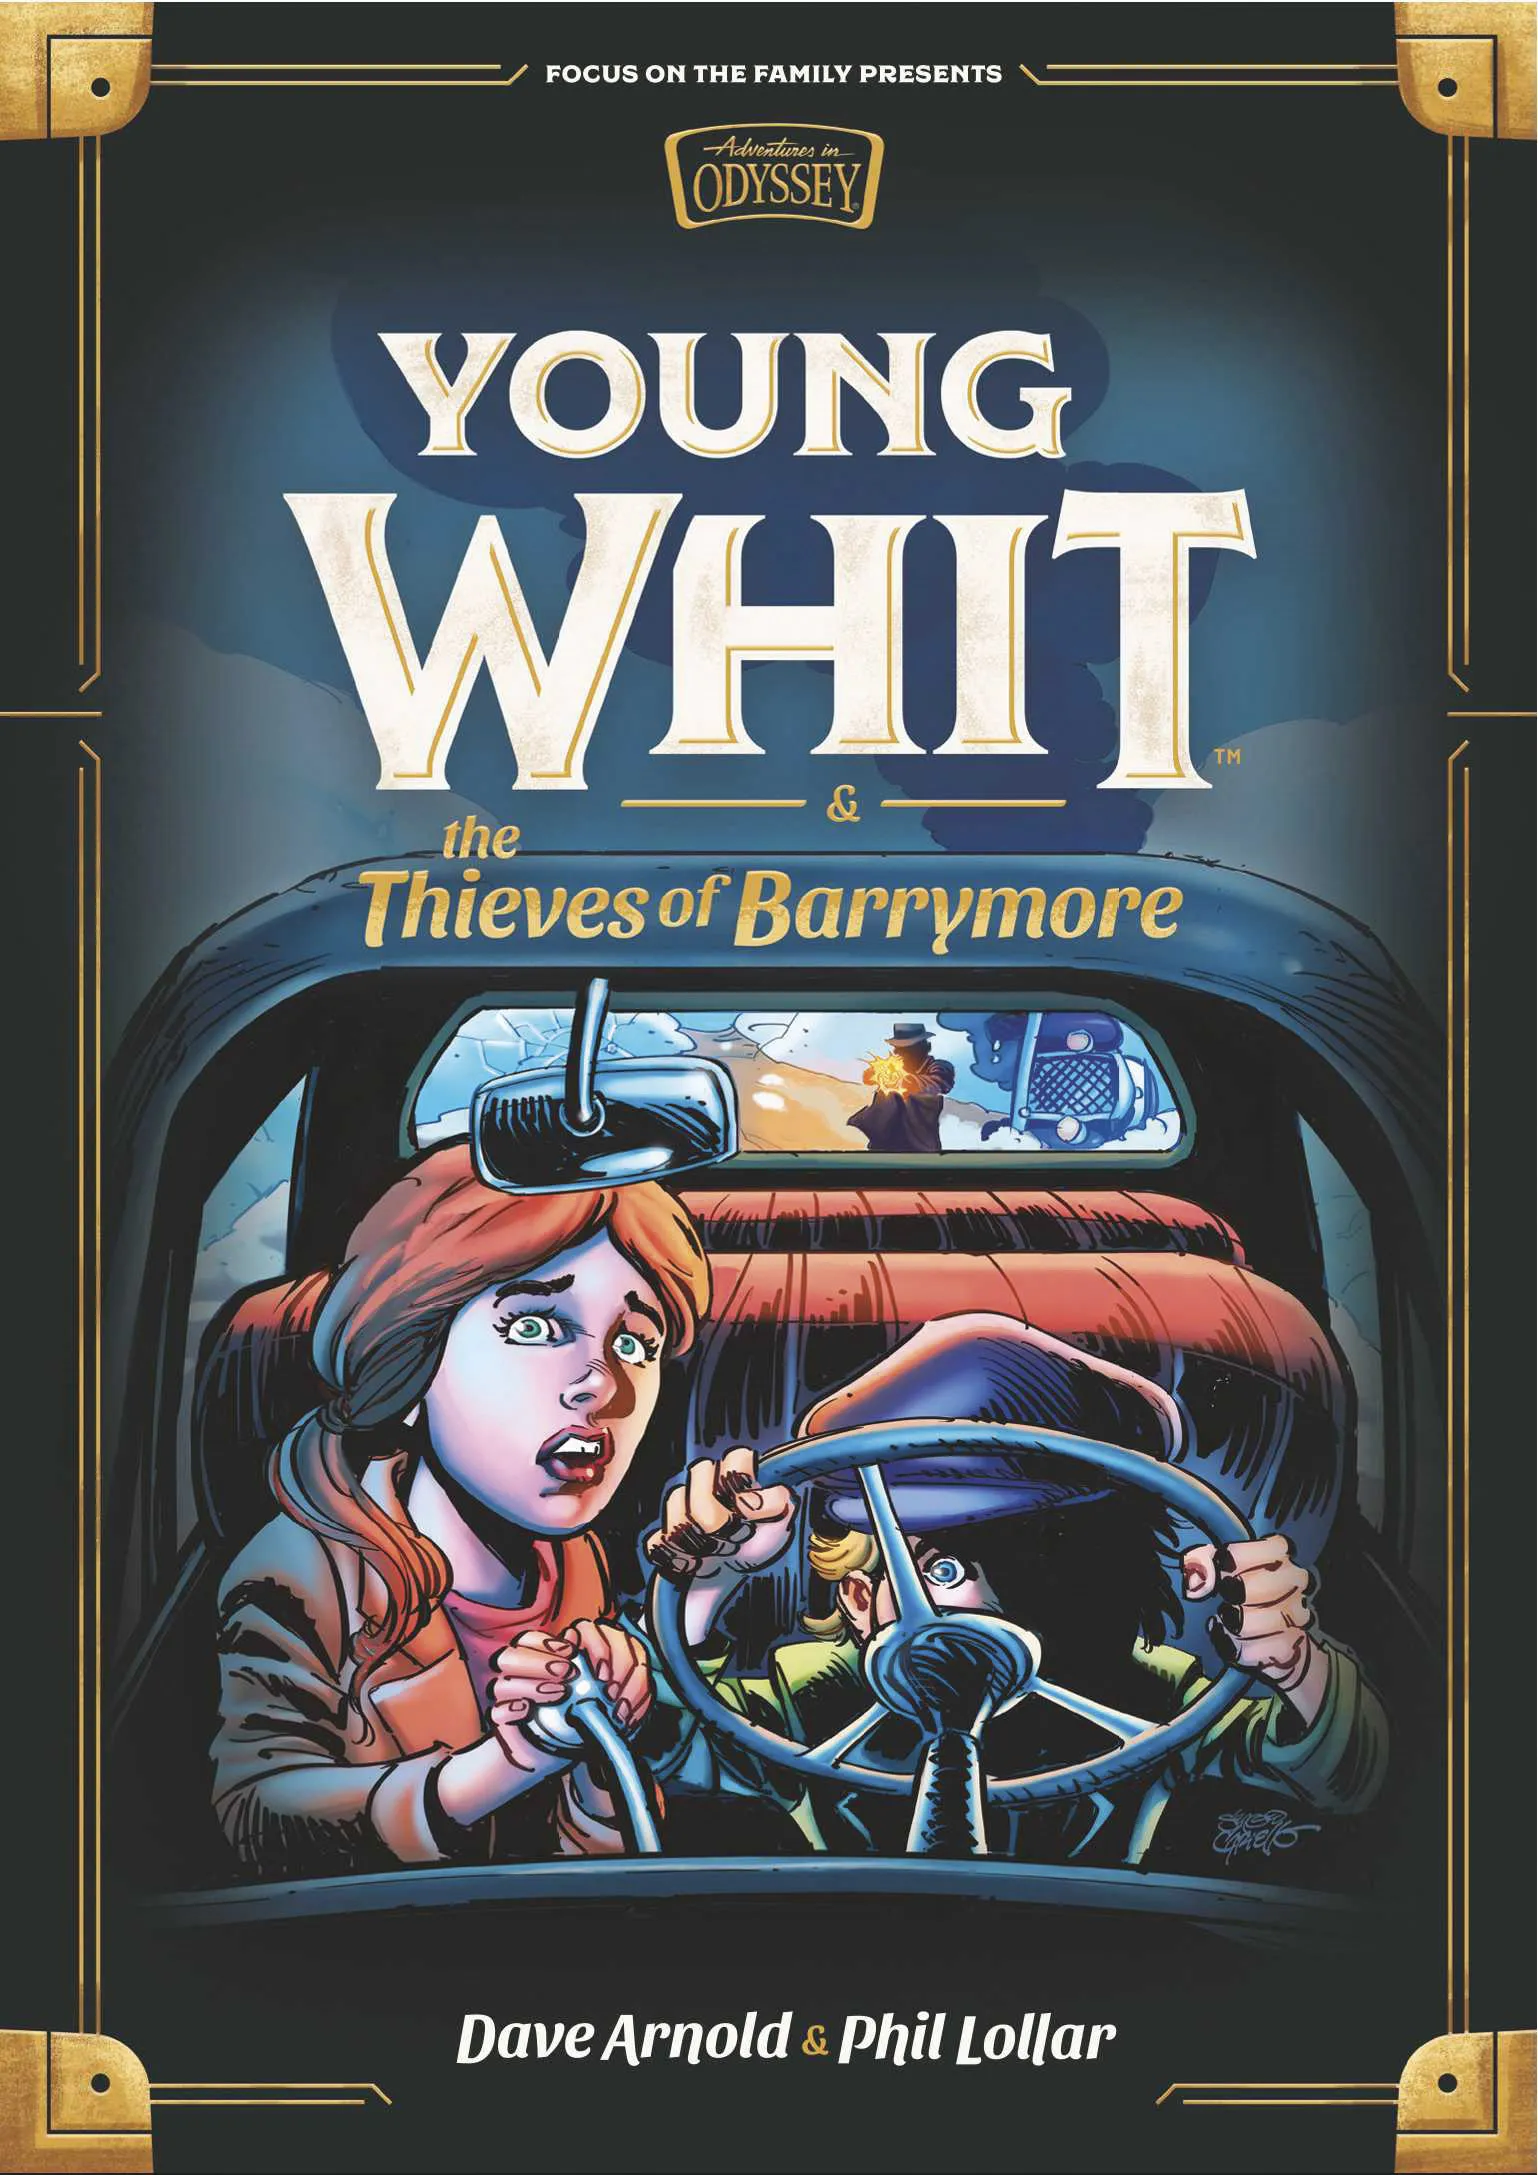 Young Whit and the Thieves of Barrymore (Young Whit #3)